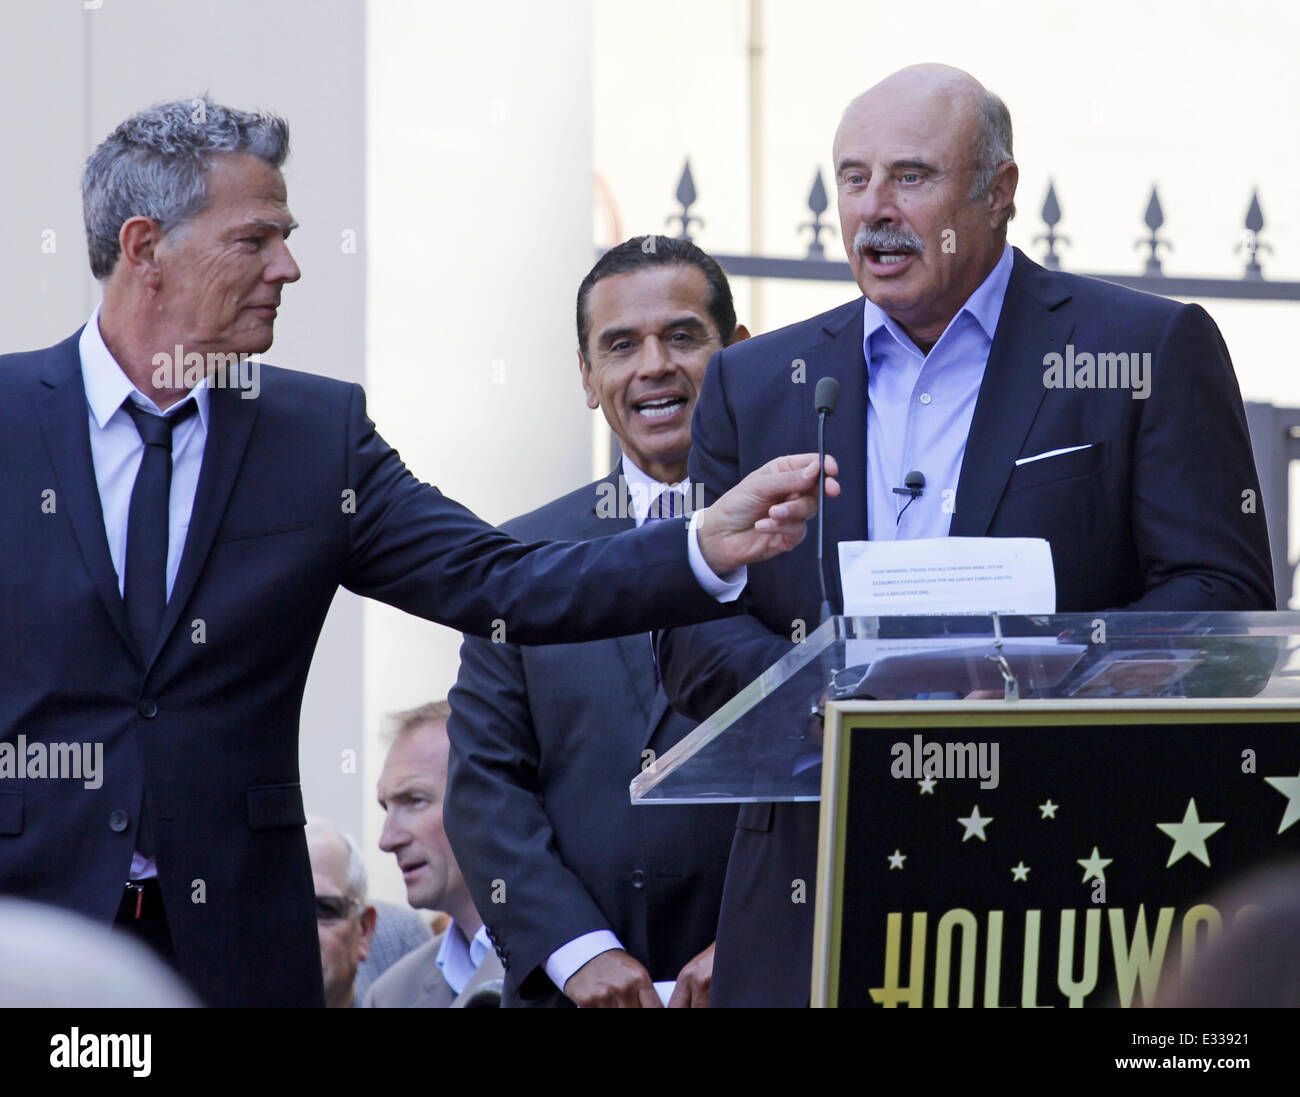 David Foster is honoured with a star on the Hollywood Walk of Fame  Featuring: David Foster,Antonio Villaregosa,Dr. Phil McGraw Where: Los Angeles, CA, United States When: 31 May 2013 om Stock Photo